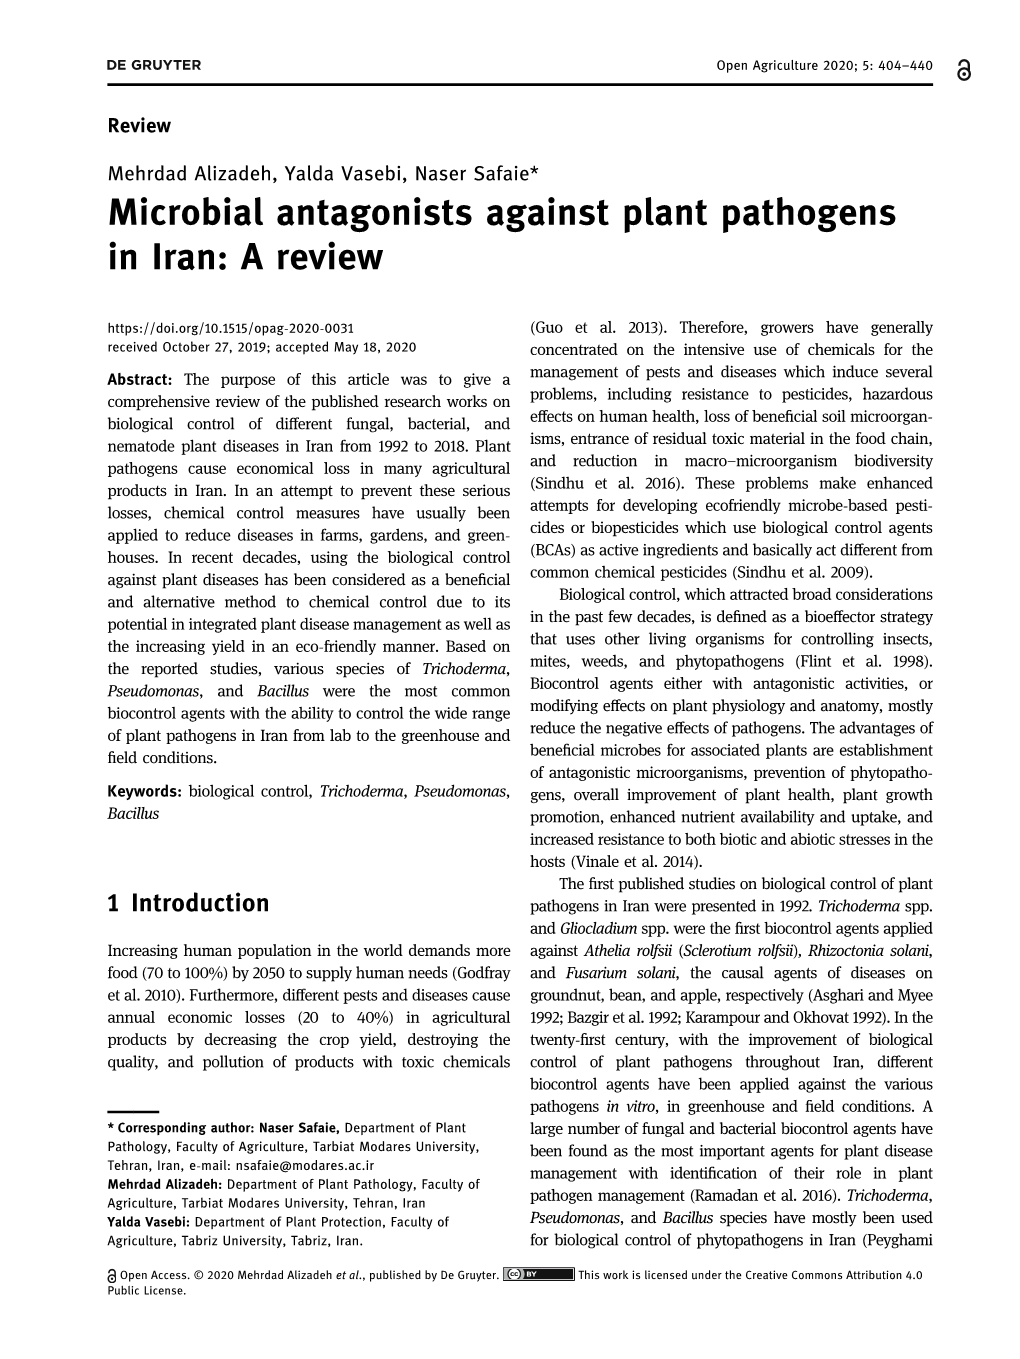 Microbial Antagonists Against Plant Pathogens in Iran: a Review